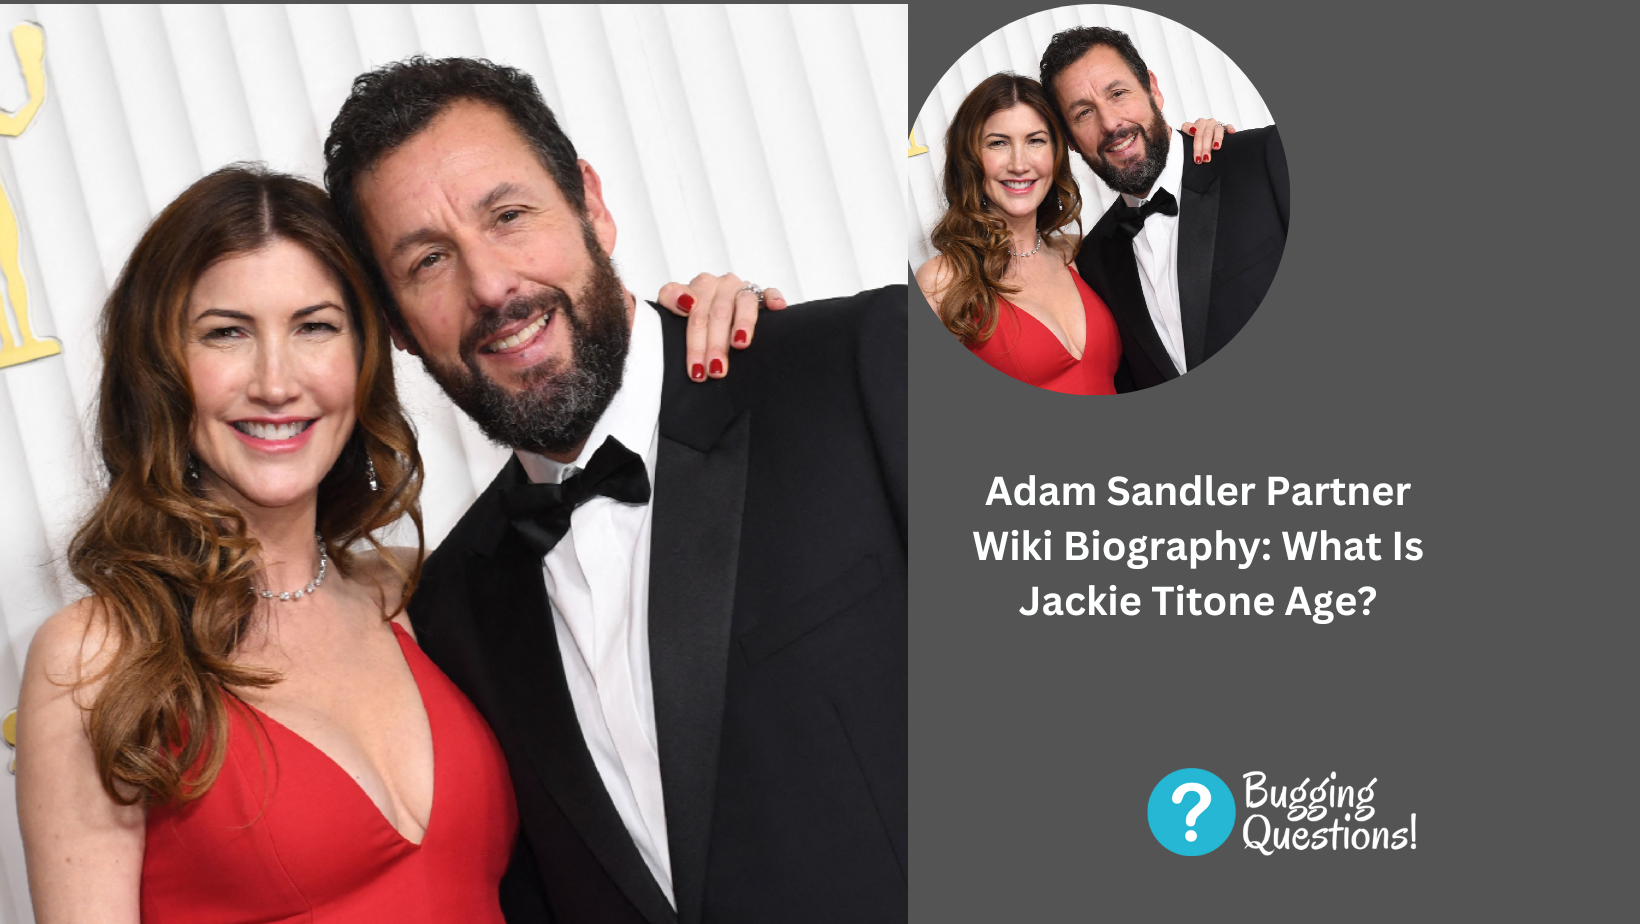 Adam Sandler Partner Wiki Biography: What Is Jackie Titone Age?